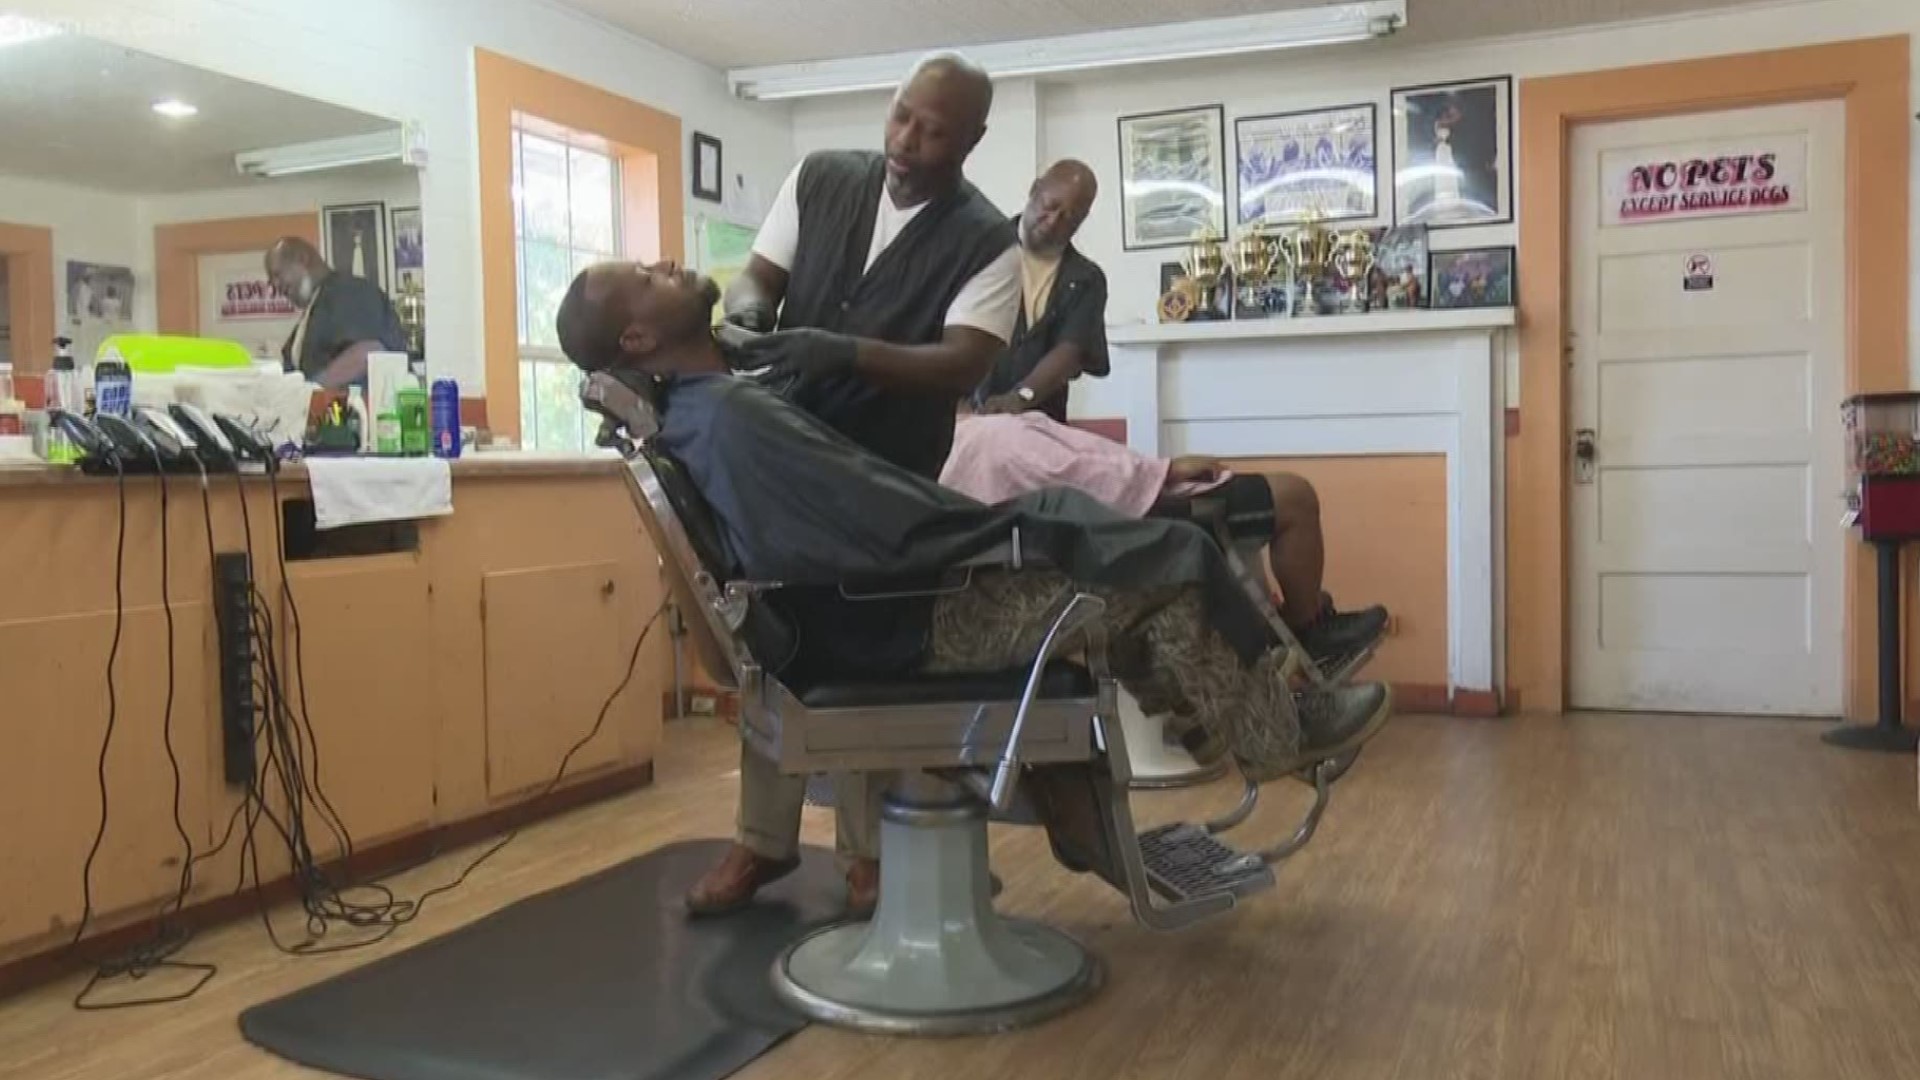 Top of the Line Barbershop and Dublin organization Fathers Among Men are hosting 'Shop Talk.' It's an opportunity for fathers to learn more about how they can be productive in their children's lives.